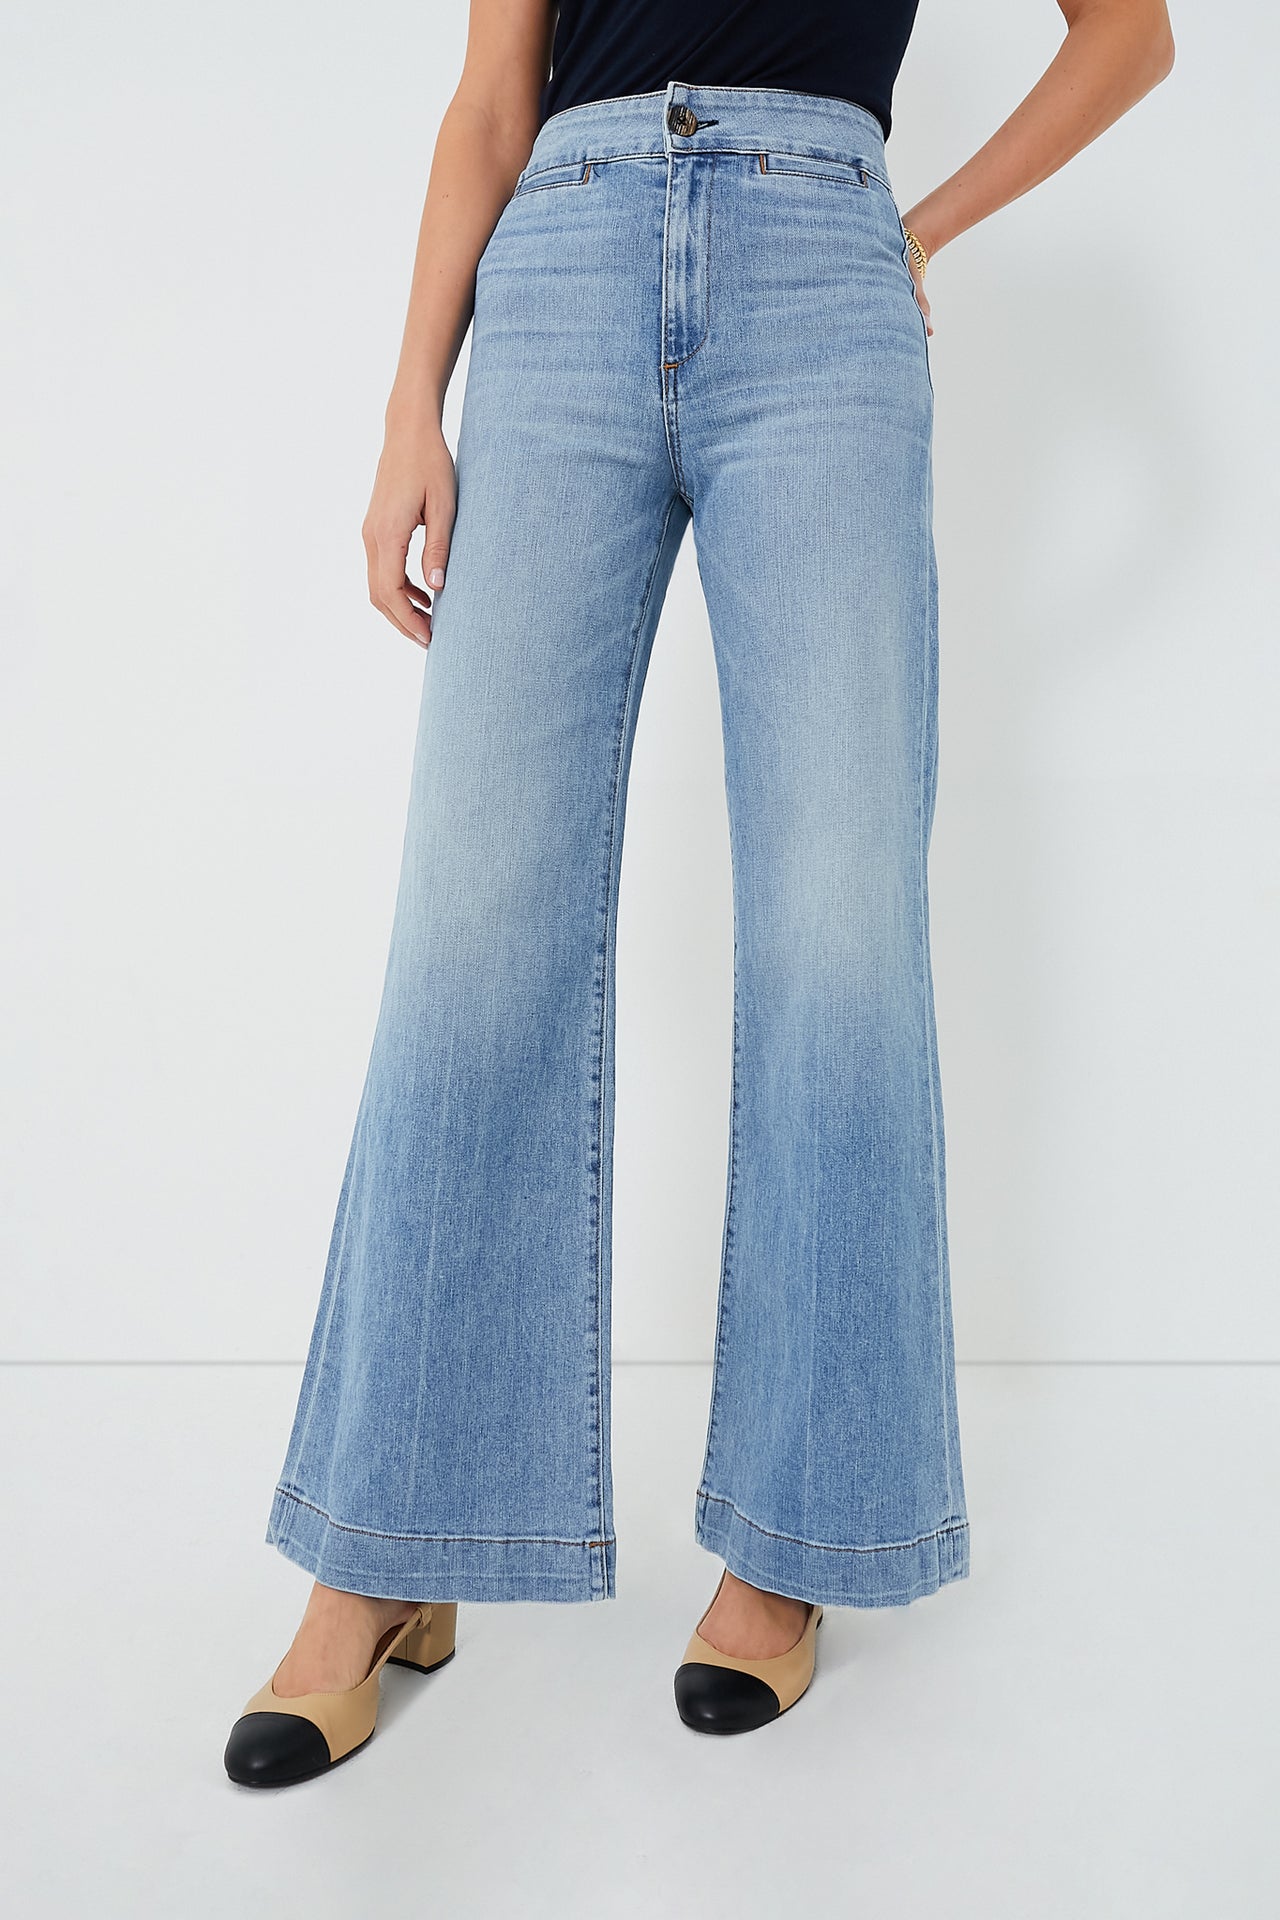 ASKK NY Keel Over Brighton Wide Leg Jeans – Mod and Retro Clothing